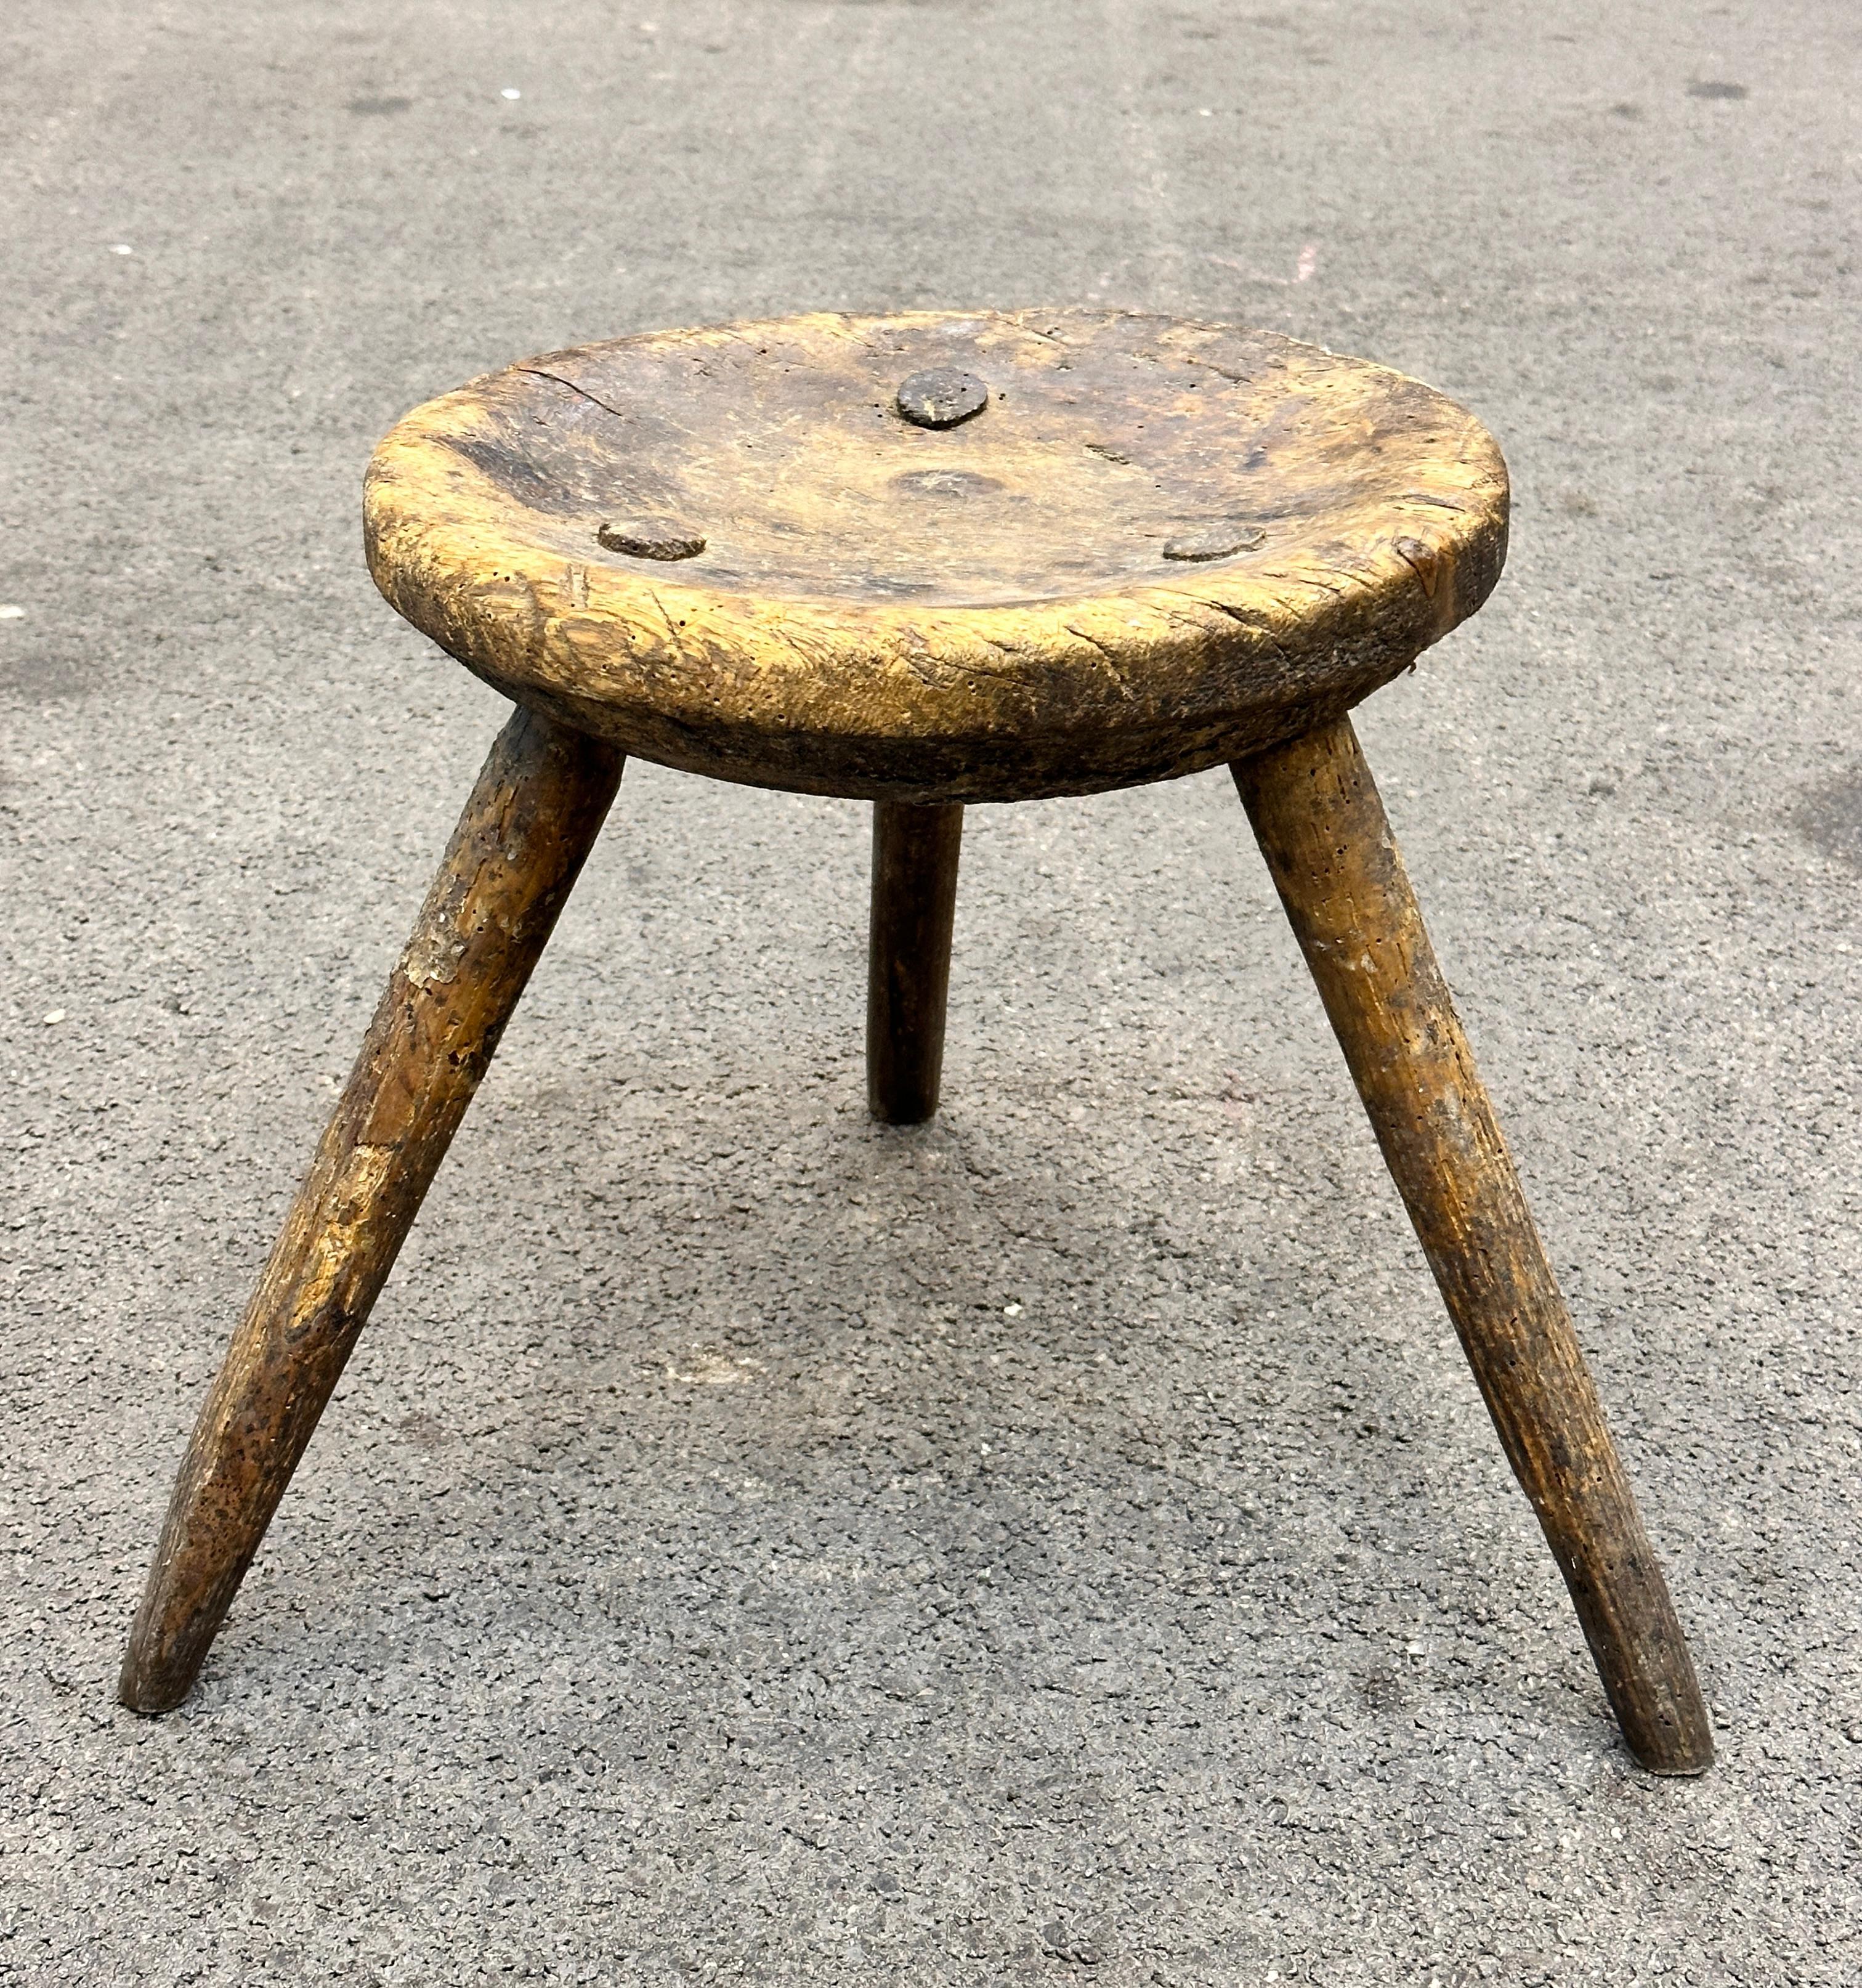 This late 19th century wabi sabi 3 leg milking stool from Austria is an excellent example of this style. The piece has a square, rustic-looking seat made of wood and is supported by three legs. The stool has a simple, understated design which is